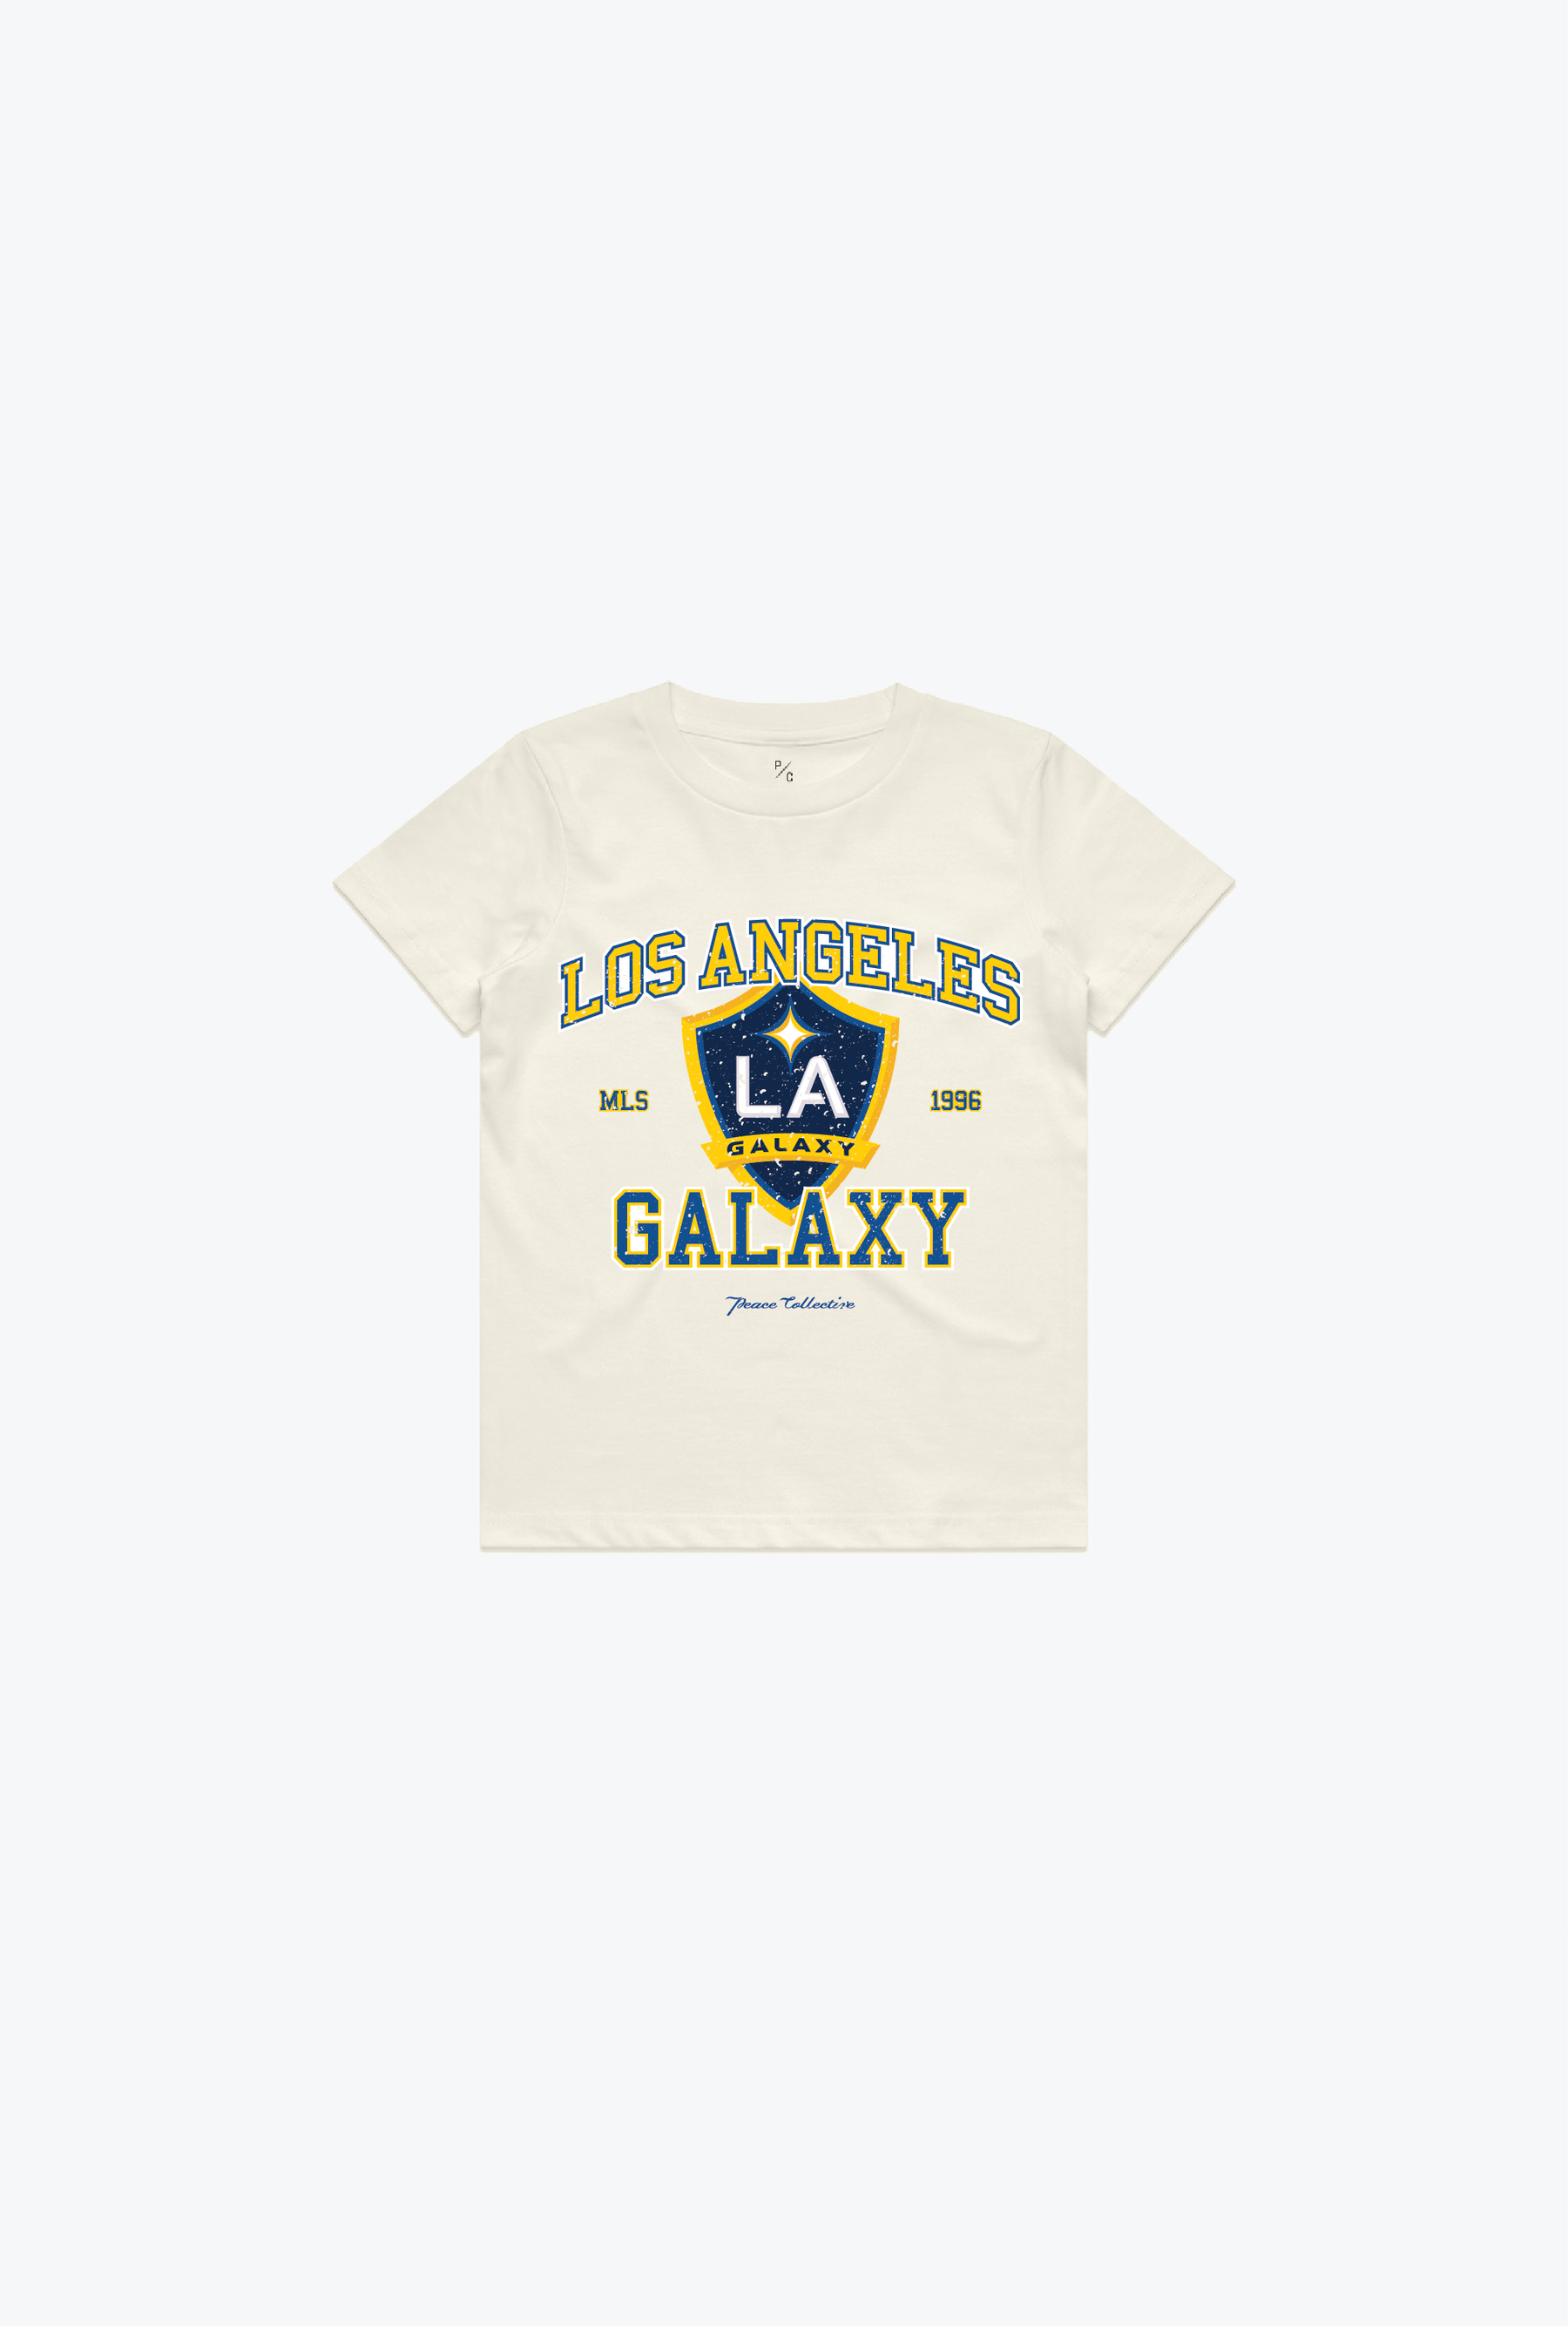 Los Angeles Galaxy Vintage Washed Kids T-Shirt - Ivory